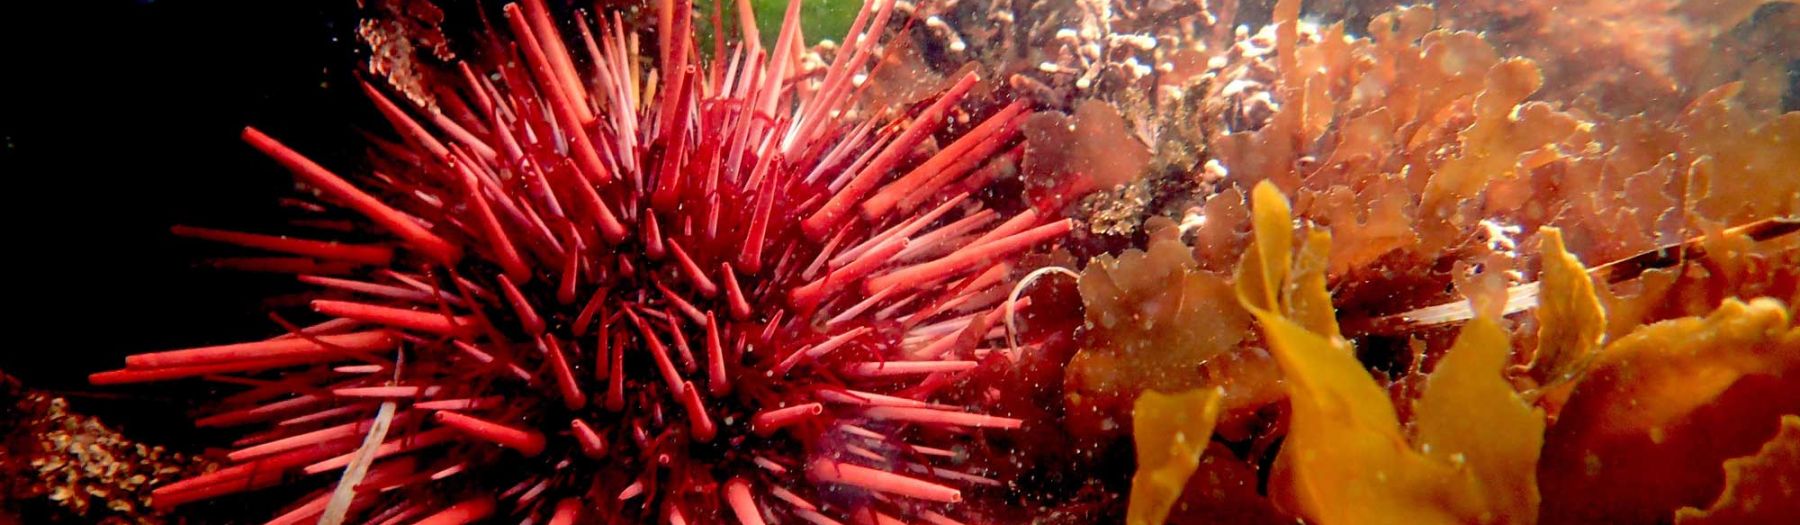 red urchin and kelp